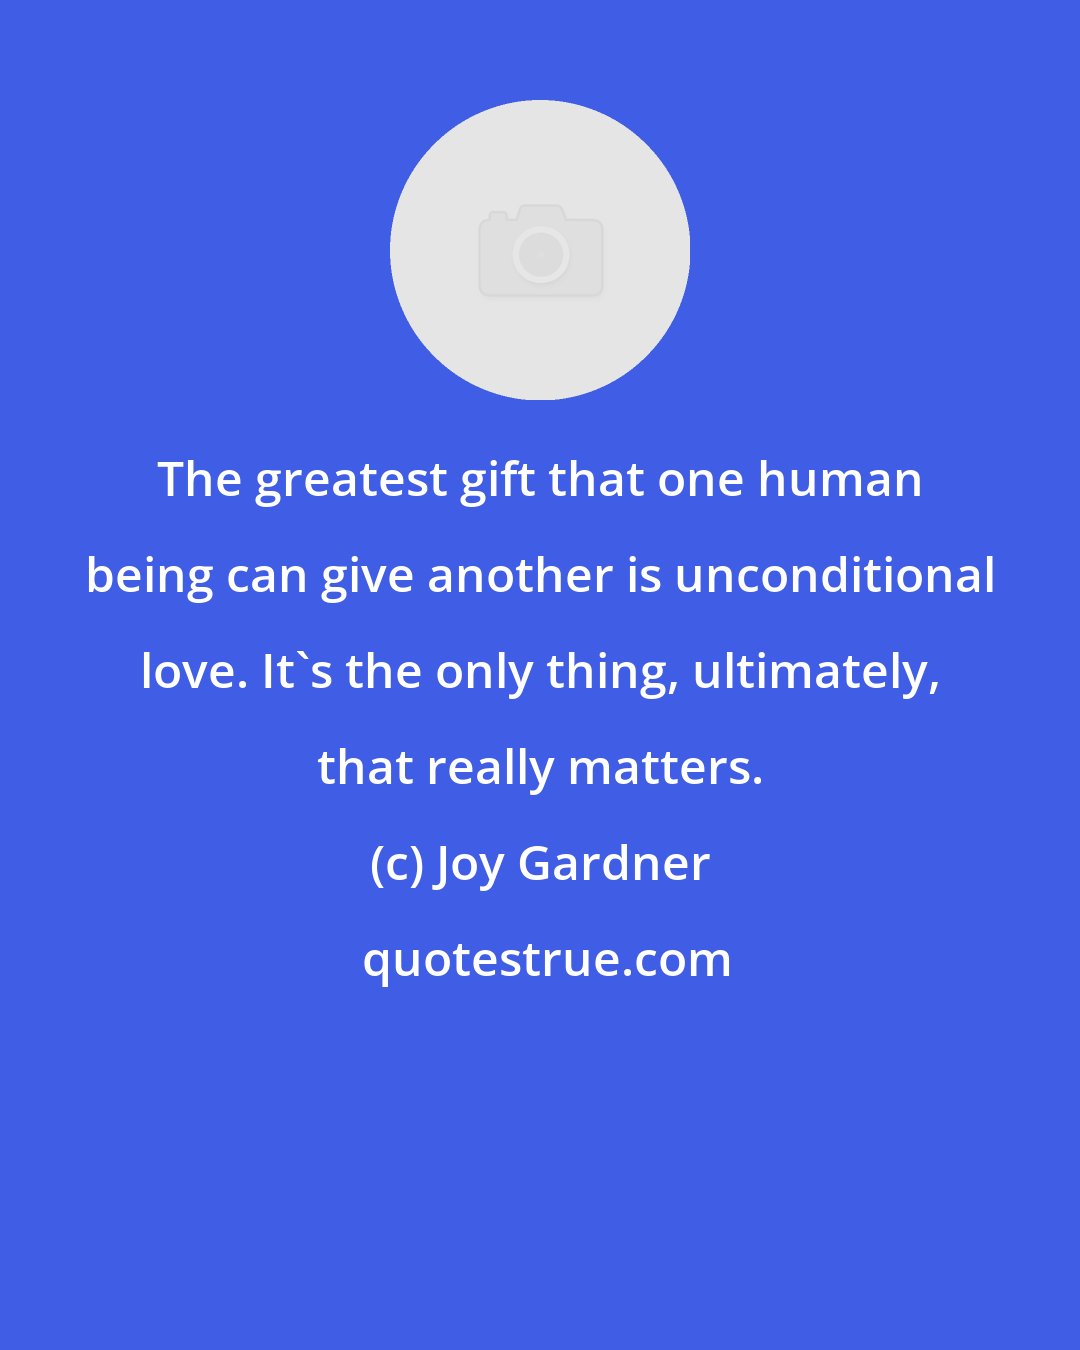 Joy Gardner: The greatest gift that one human being can give another is unconditional love. It's the only thing, ultimately, that really matters.